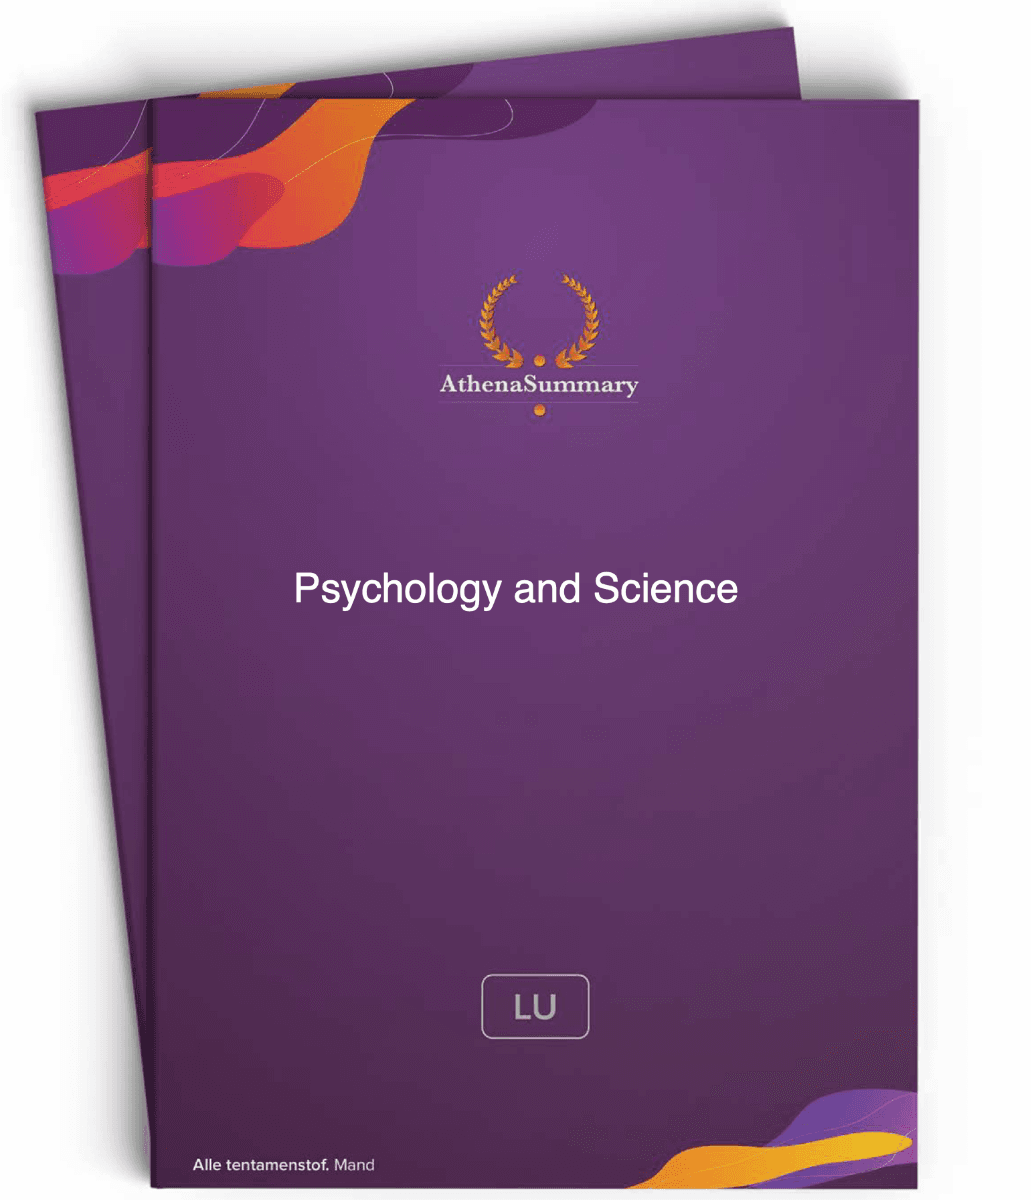 Literature Summary - Psychology and Science